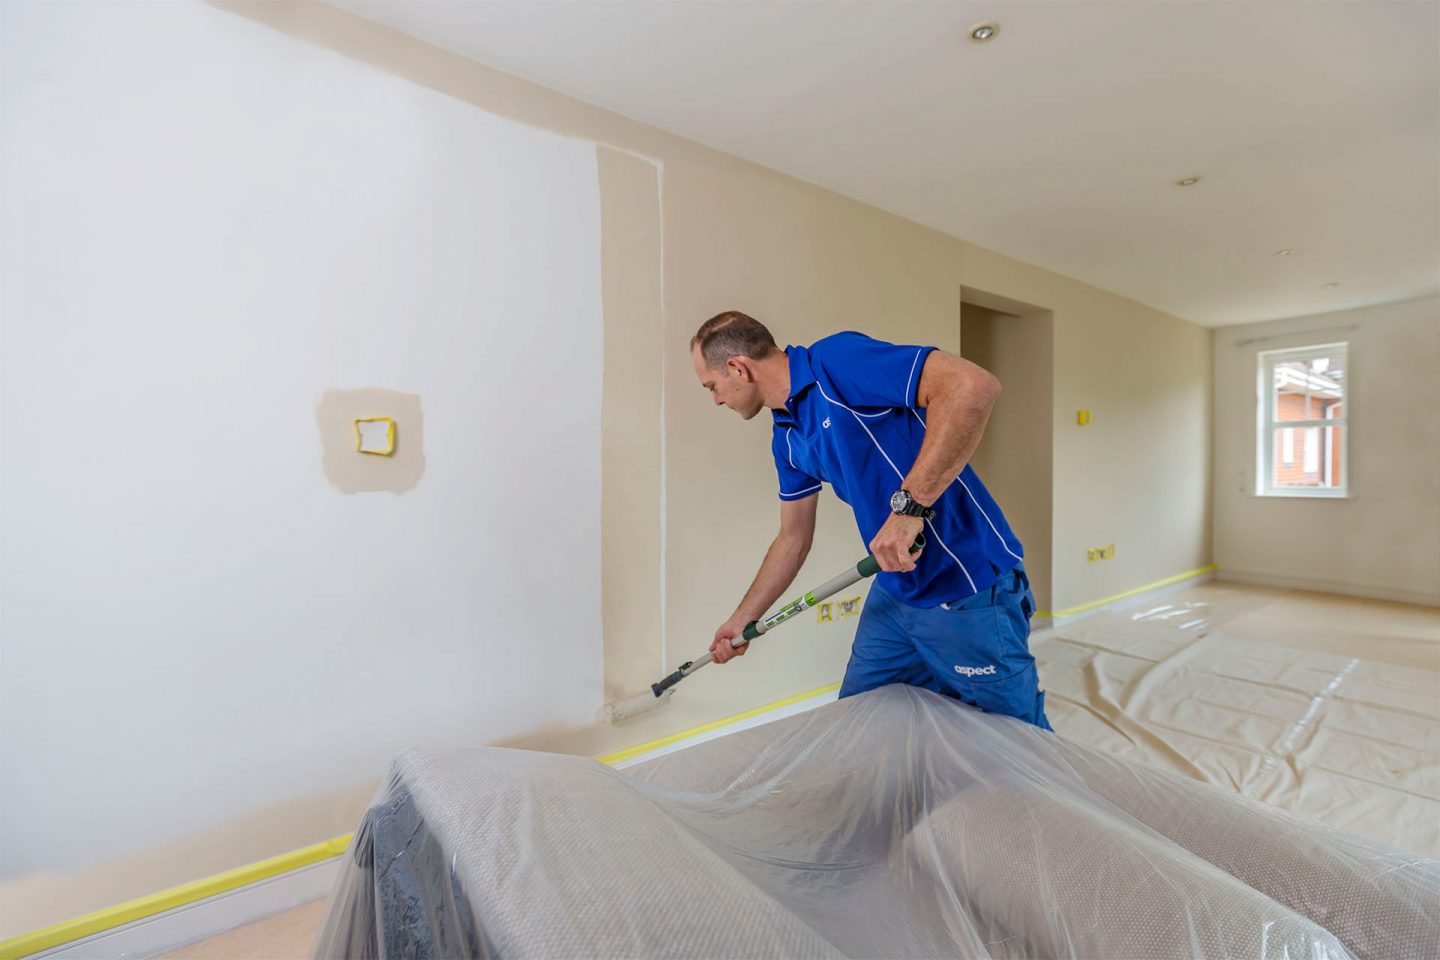 Painter and decorator jobs in west london